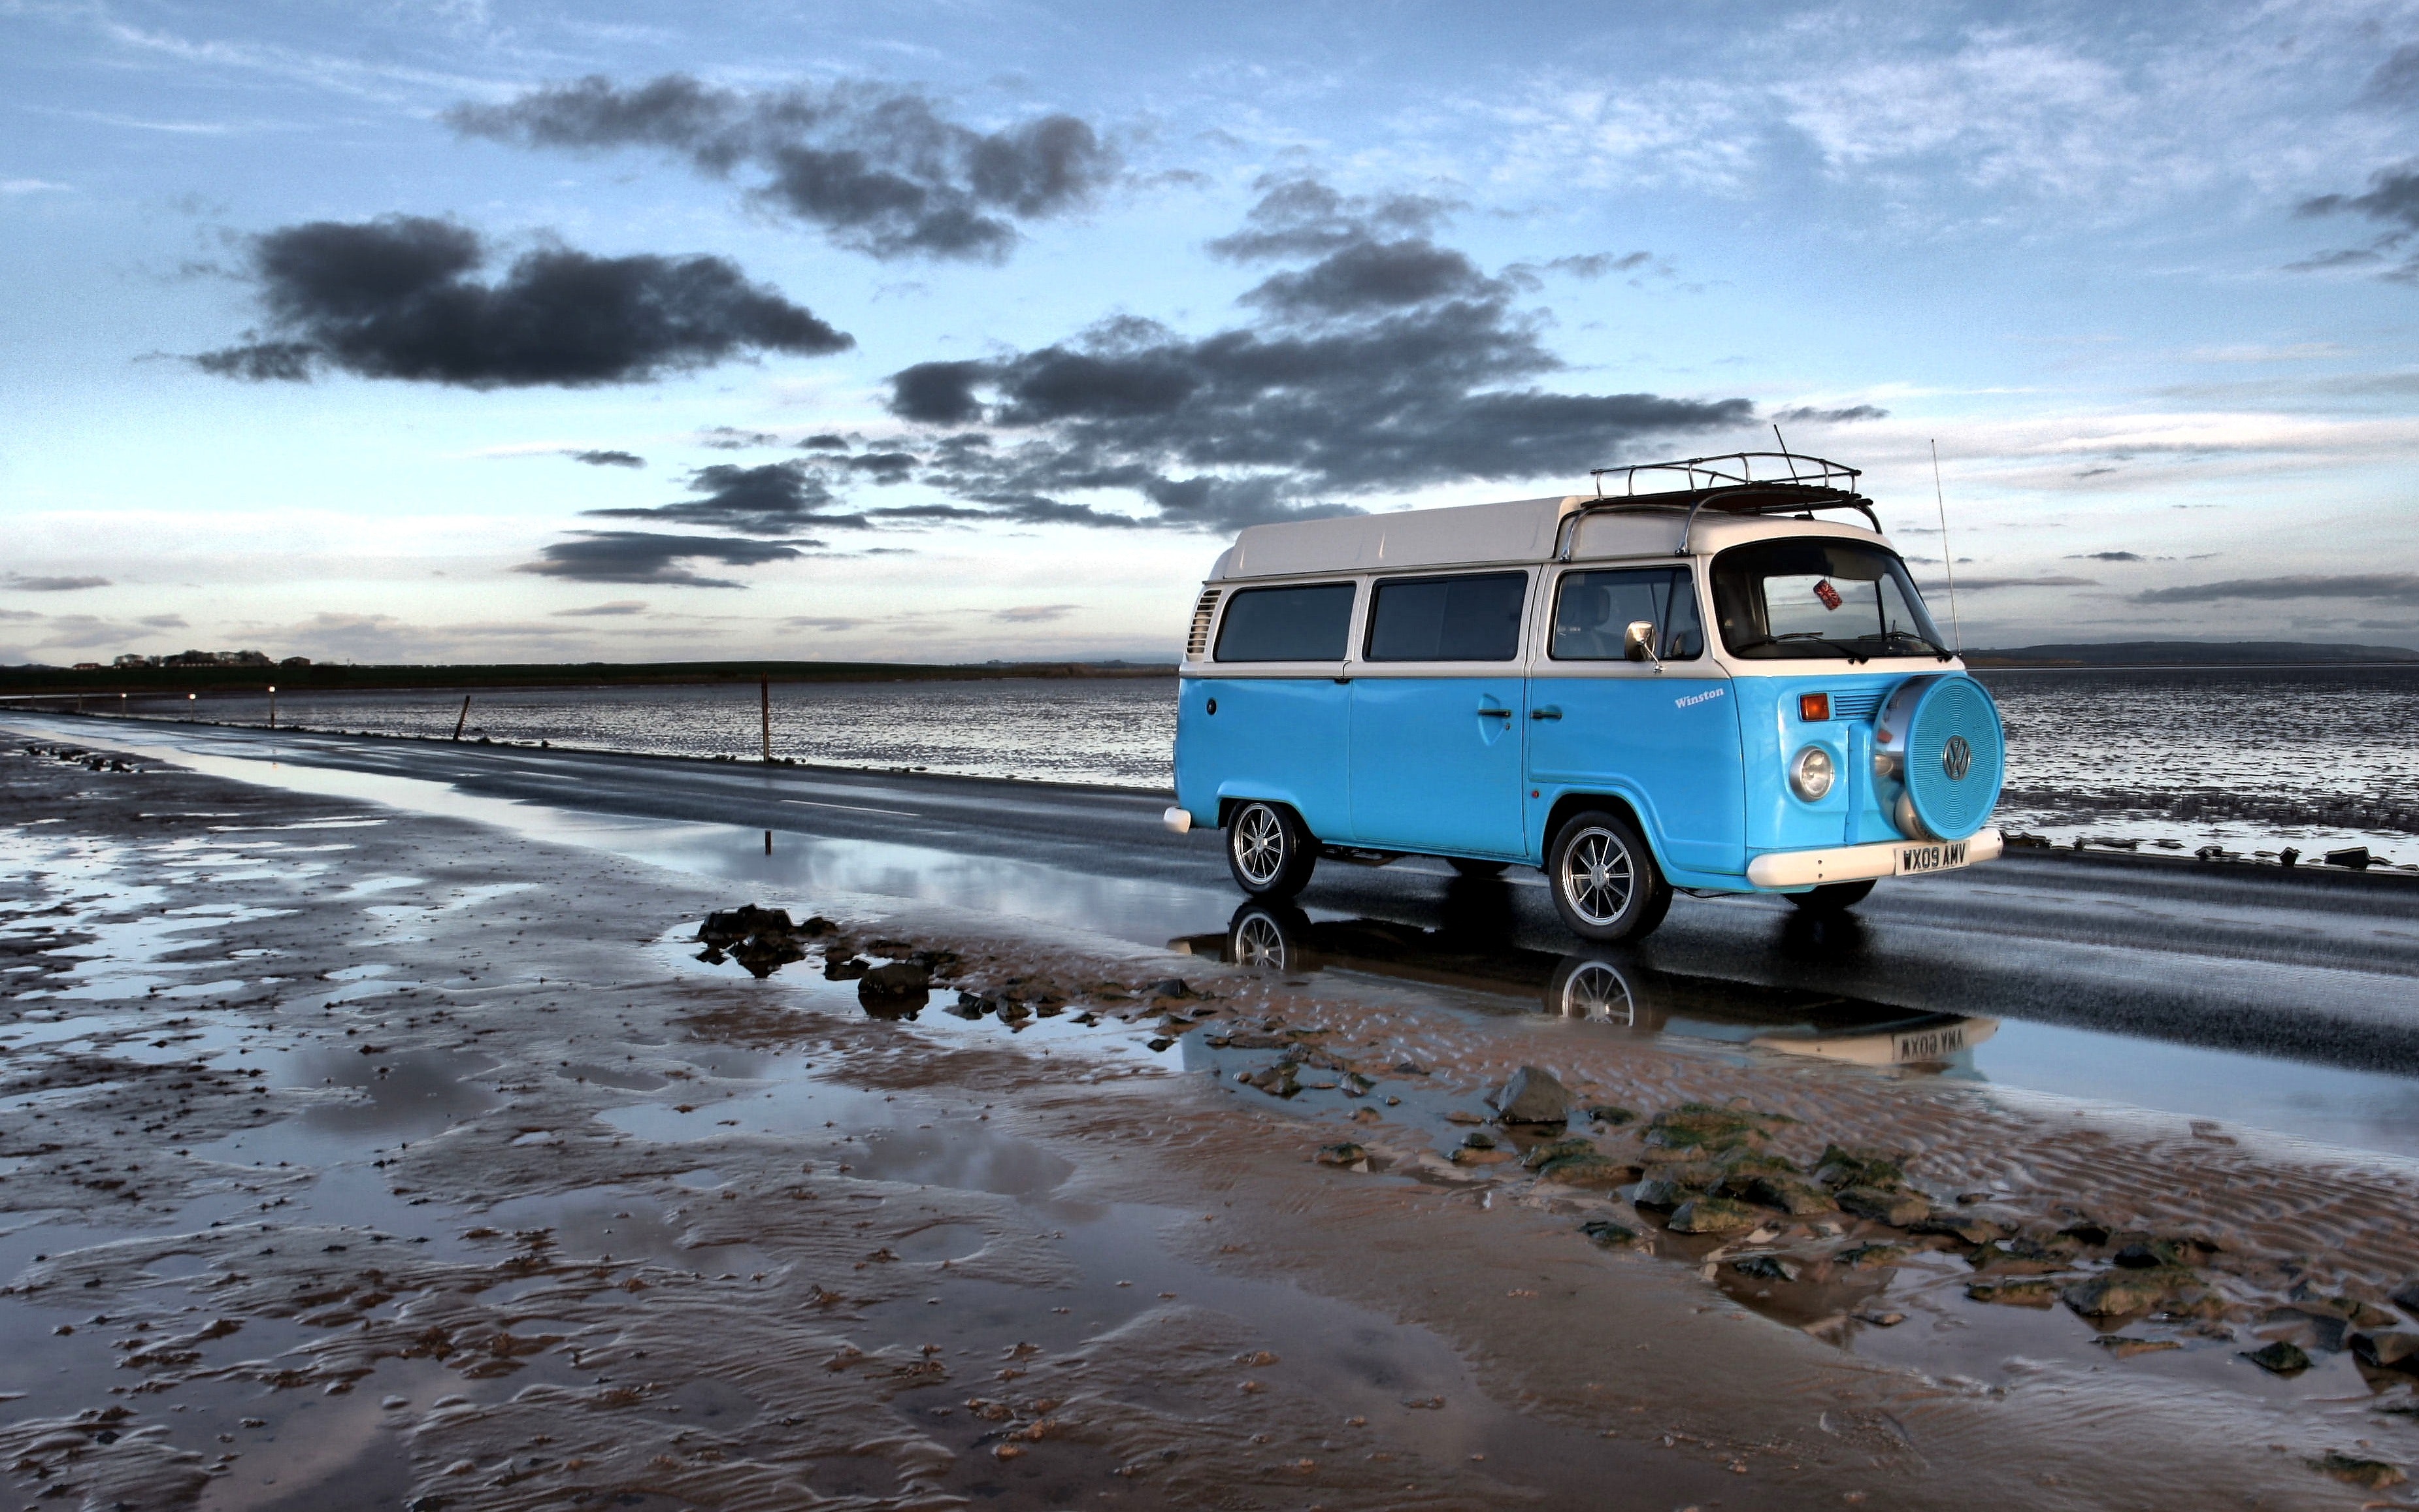 10 Tips to Create an Amazing Campervan Trip